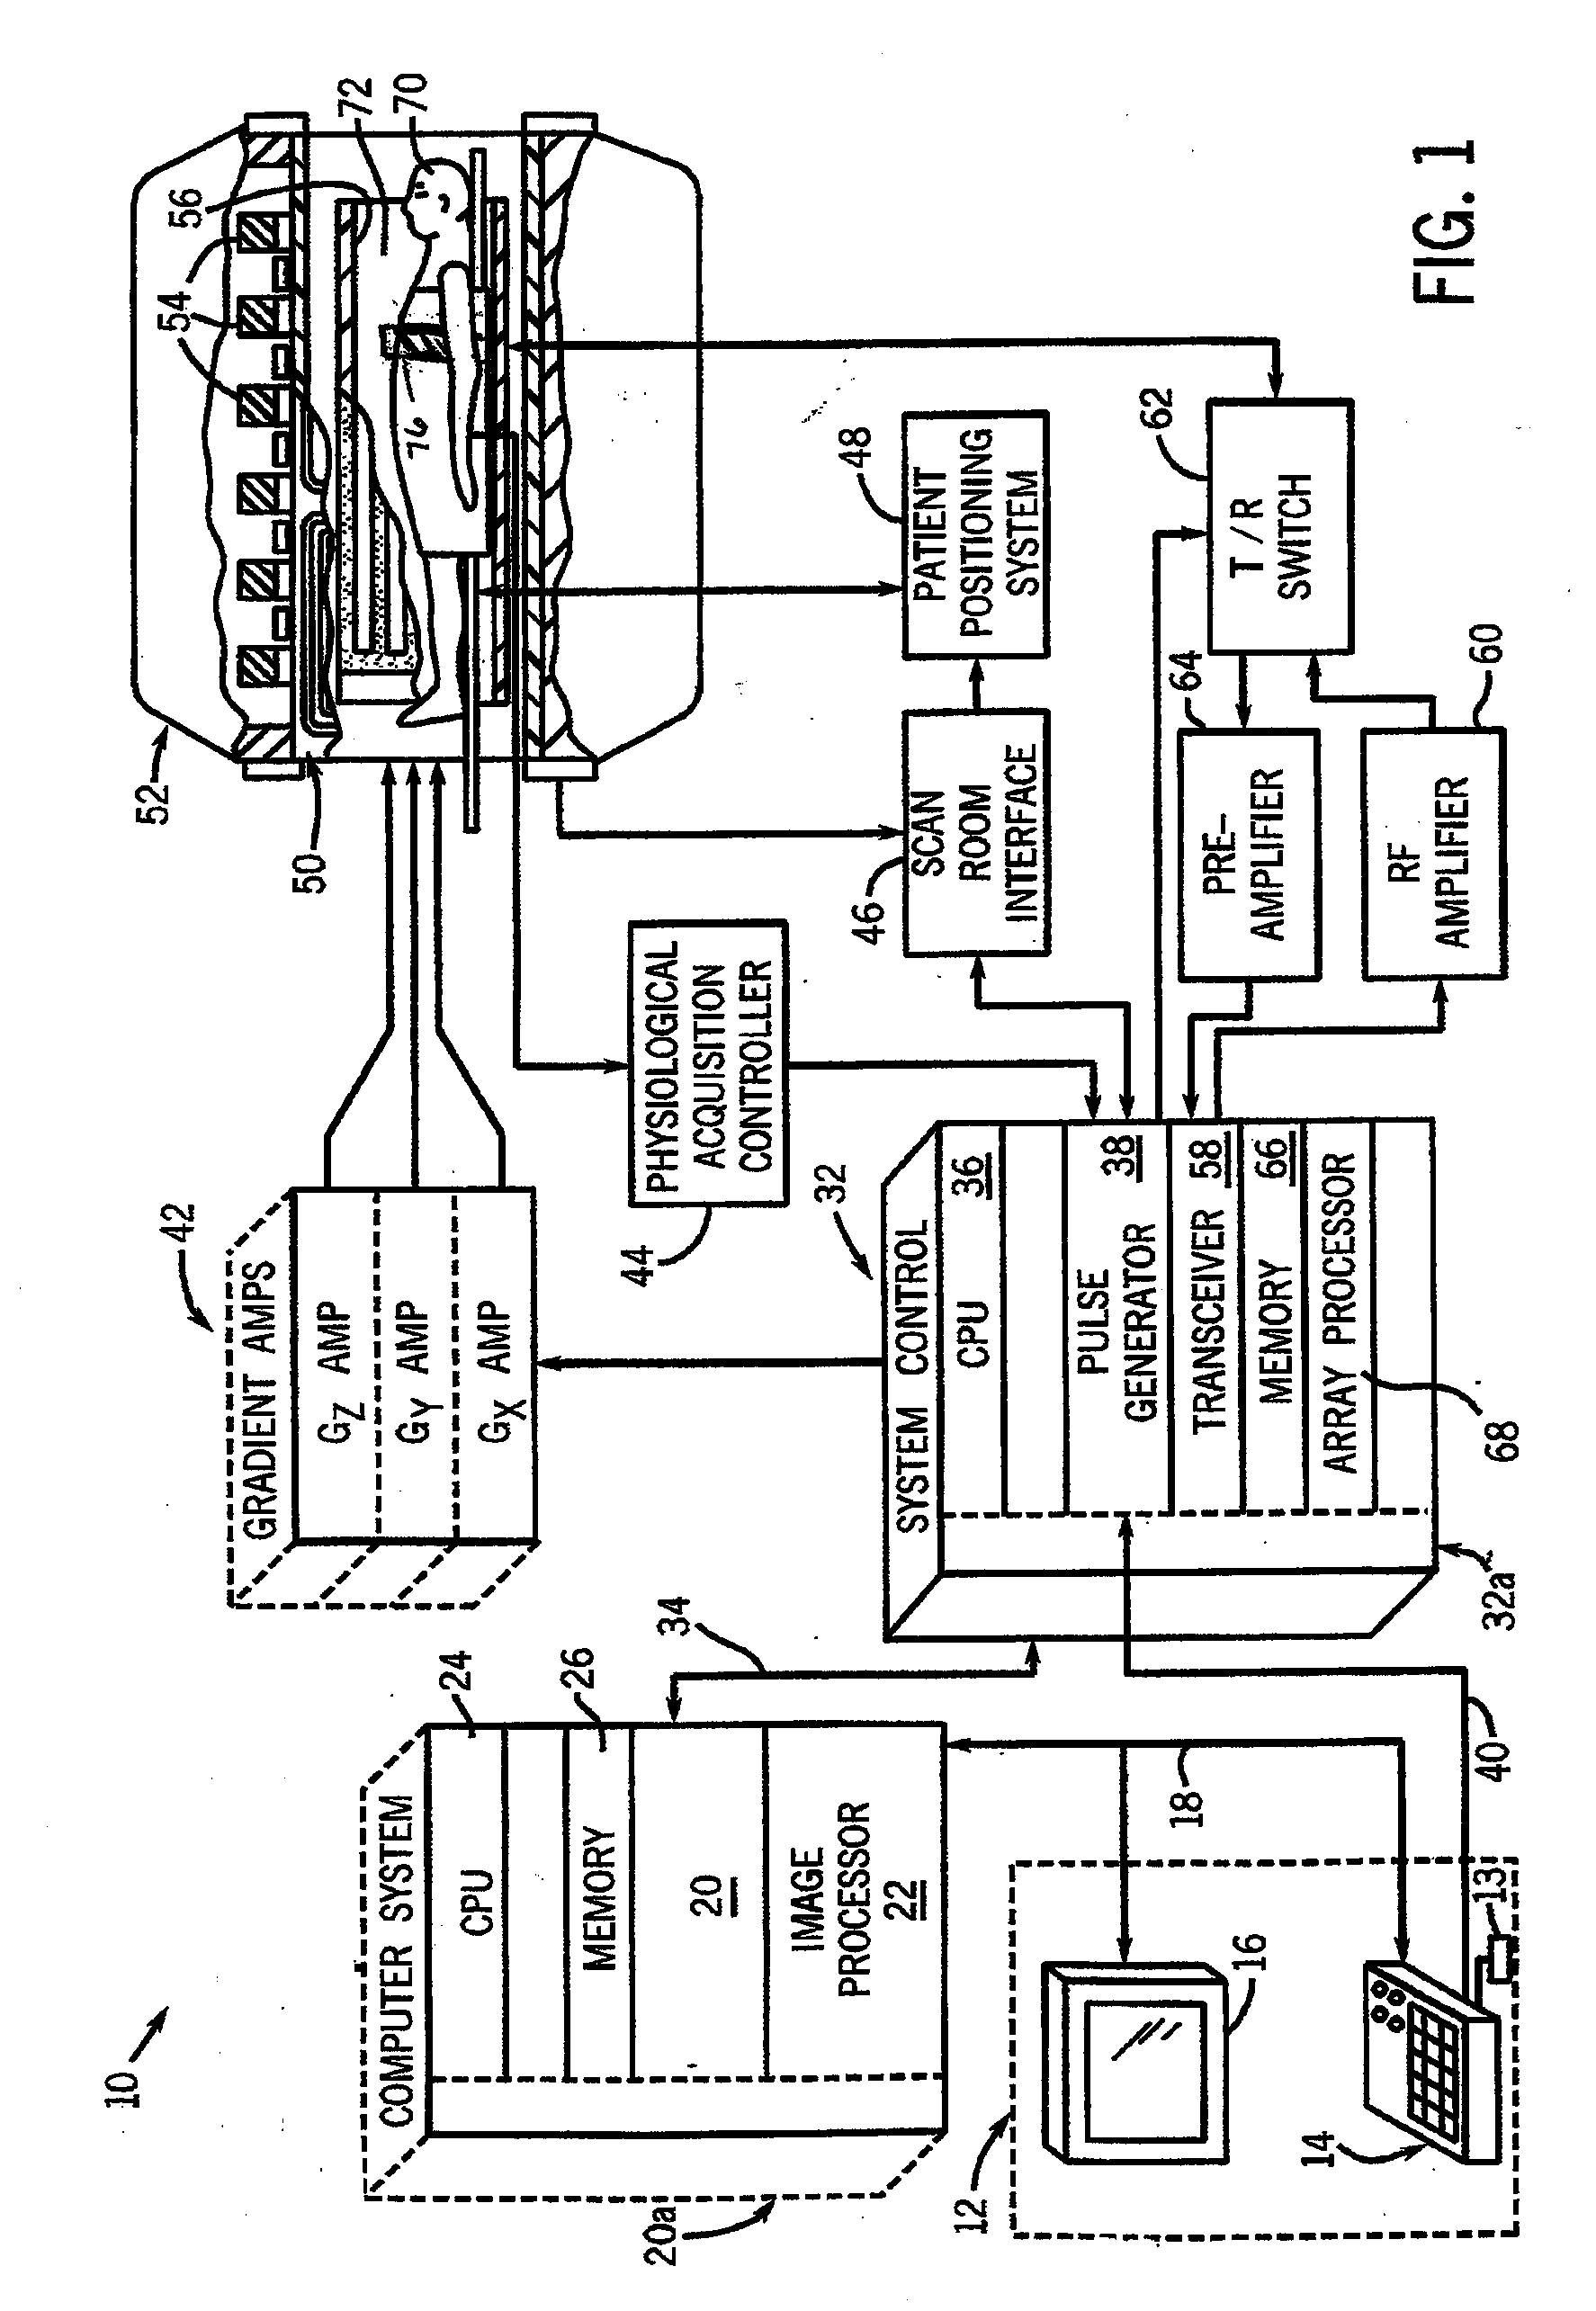 Method and apparatus for multi-coil magnetic resonance imaging